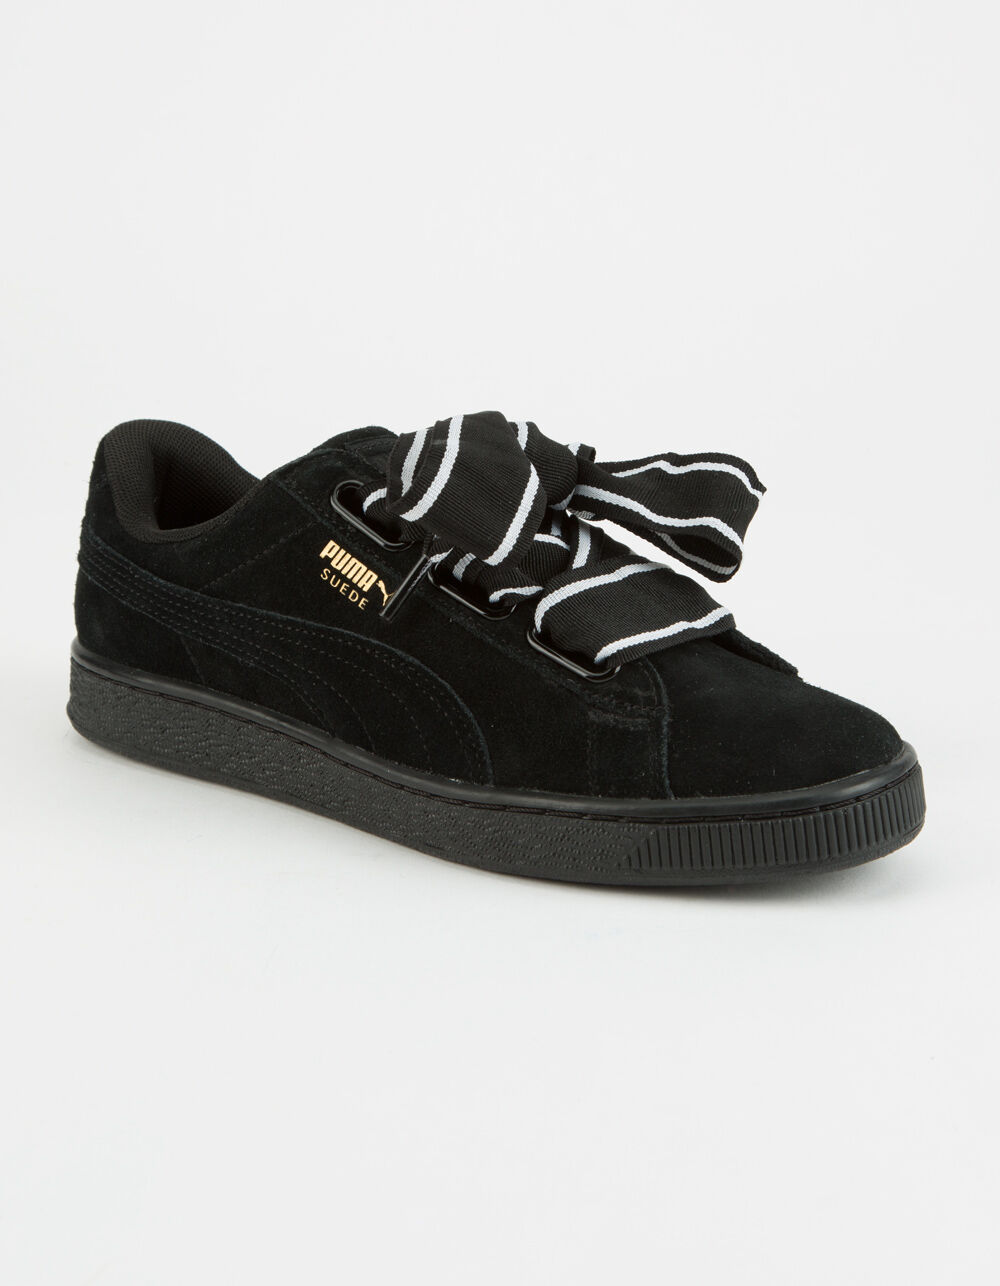 PUMA Suede Heart Satin Womens Shoes image number 1